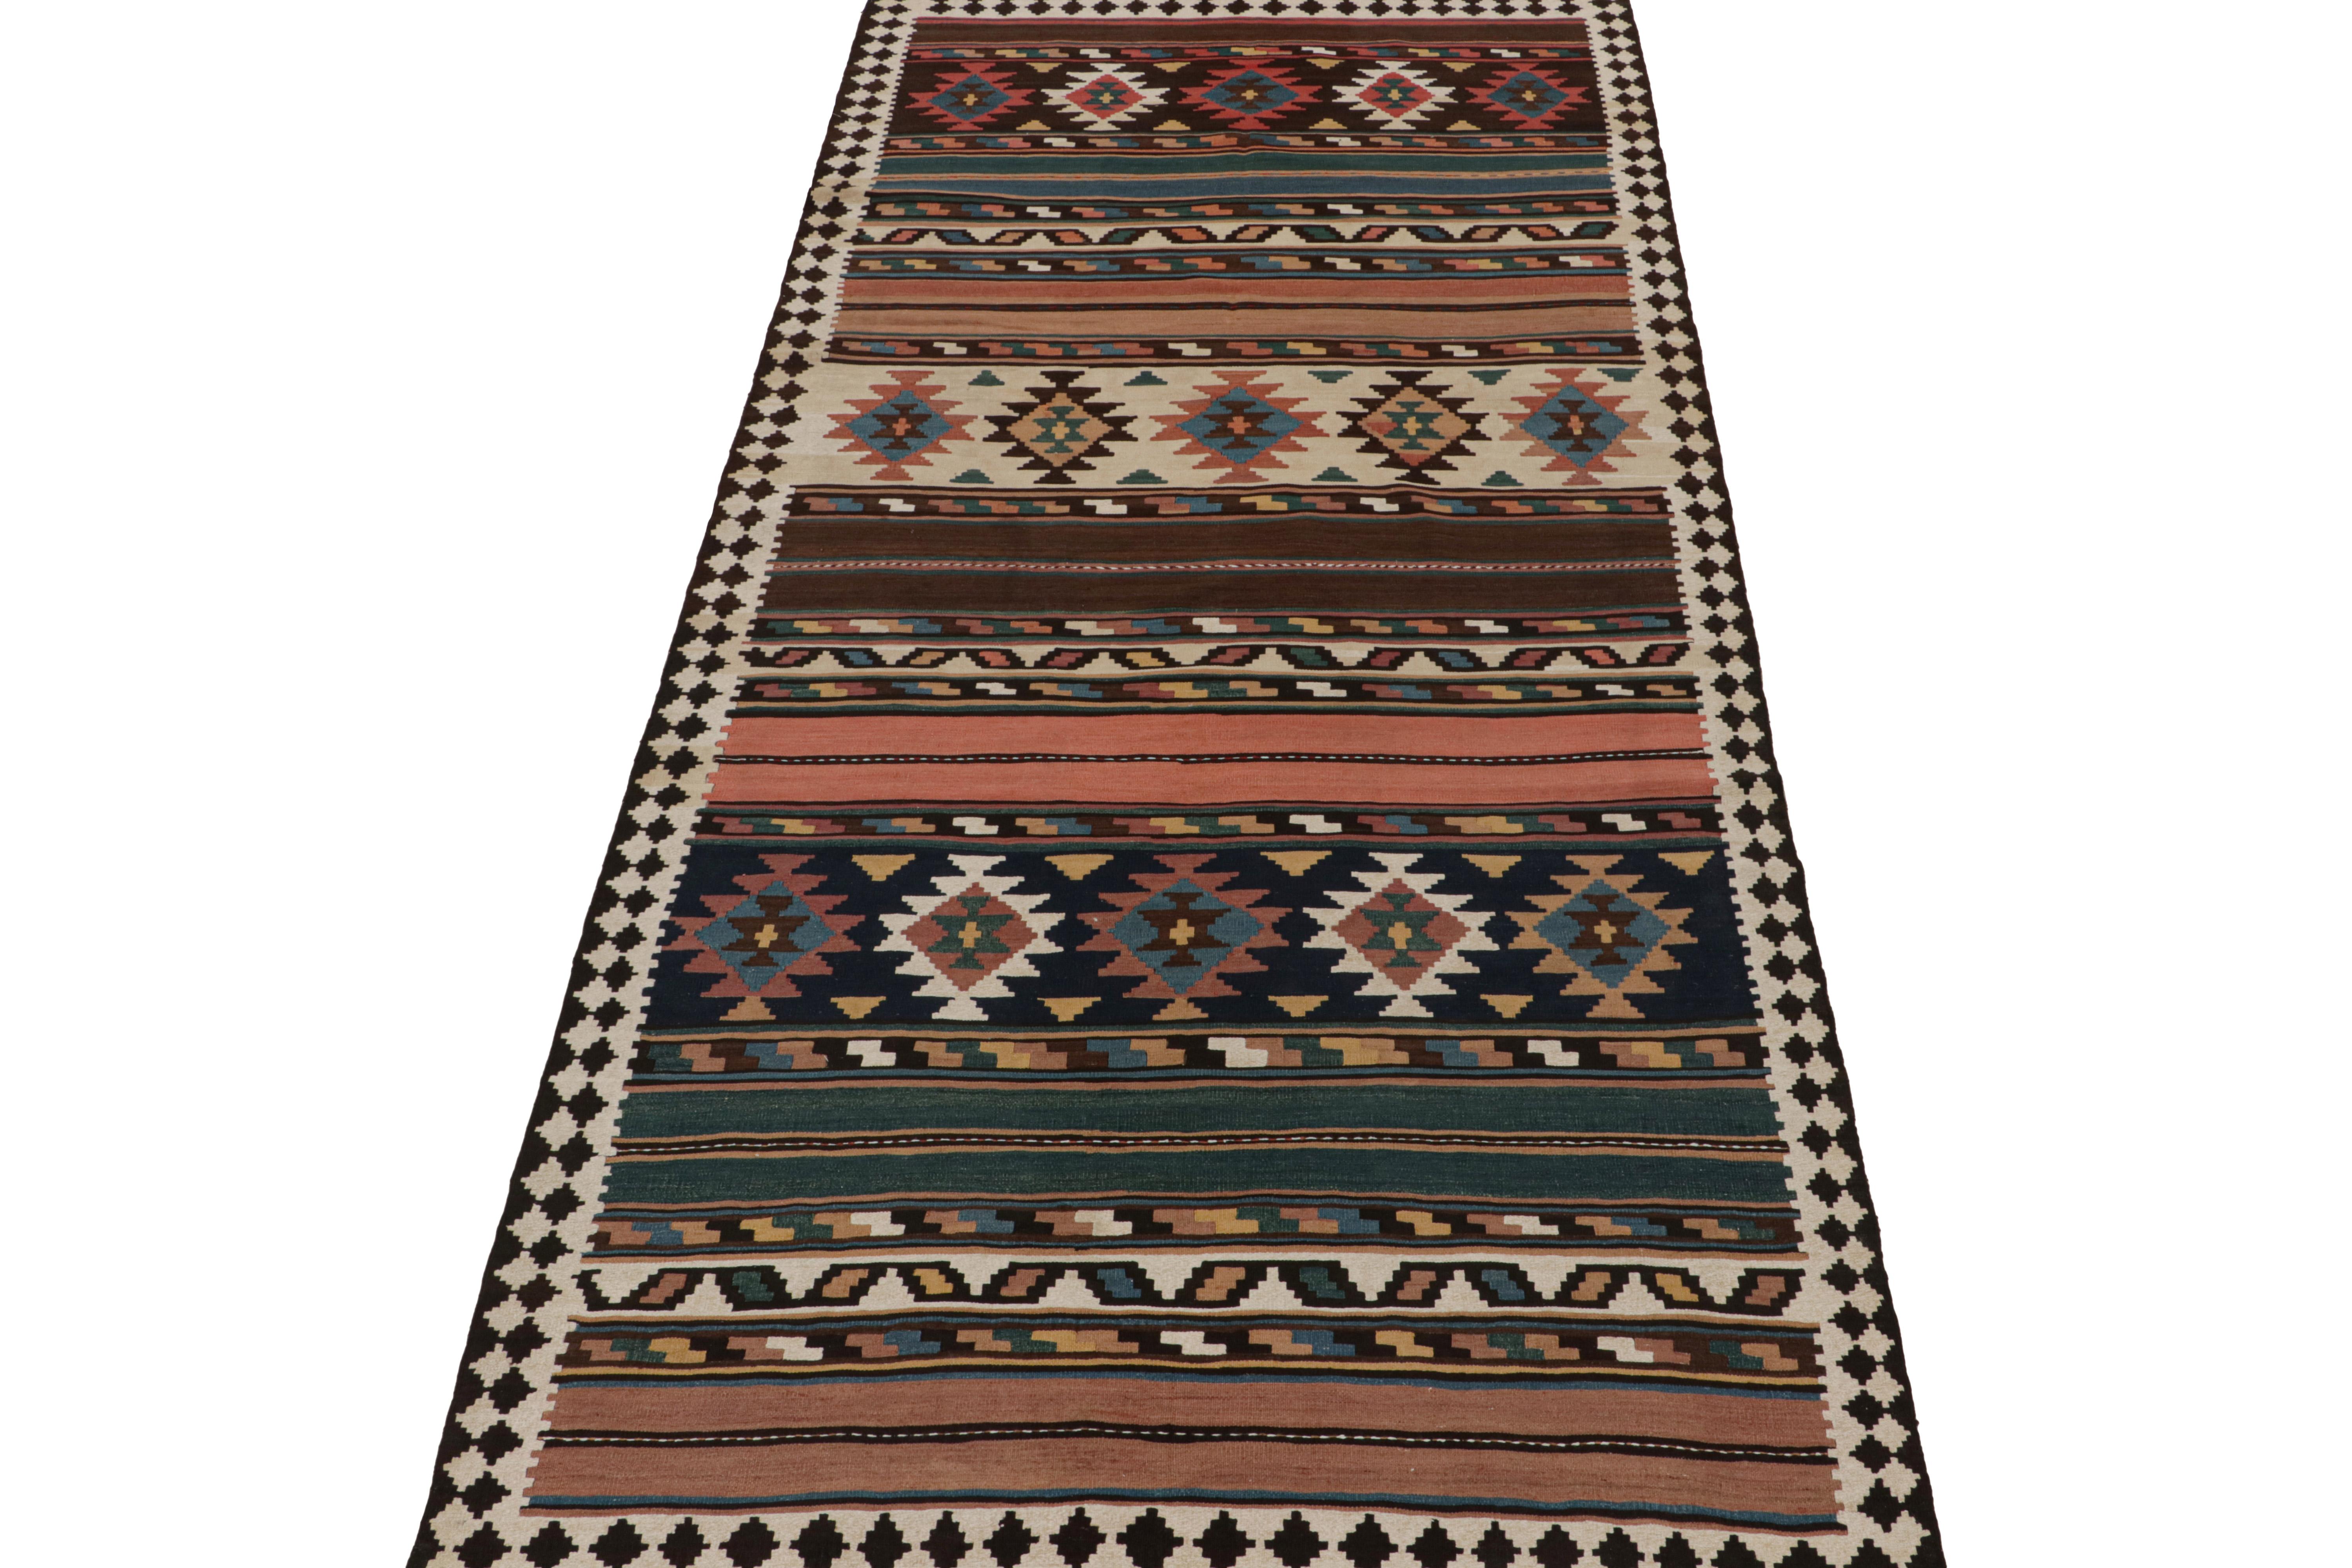 Vintage Bidjar Persian Kilim with Geometric Patterns In Good Condition For Sale In Long Island City, NY